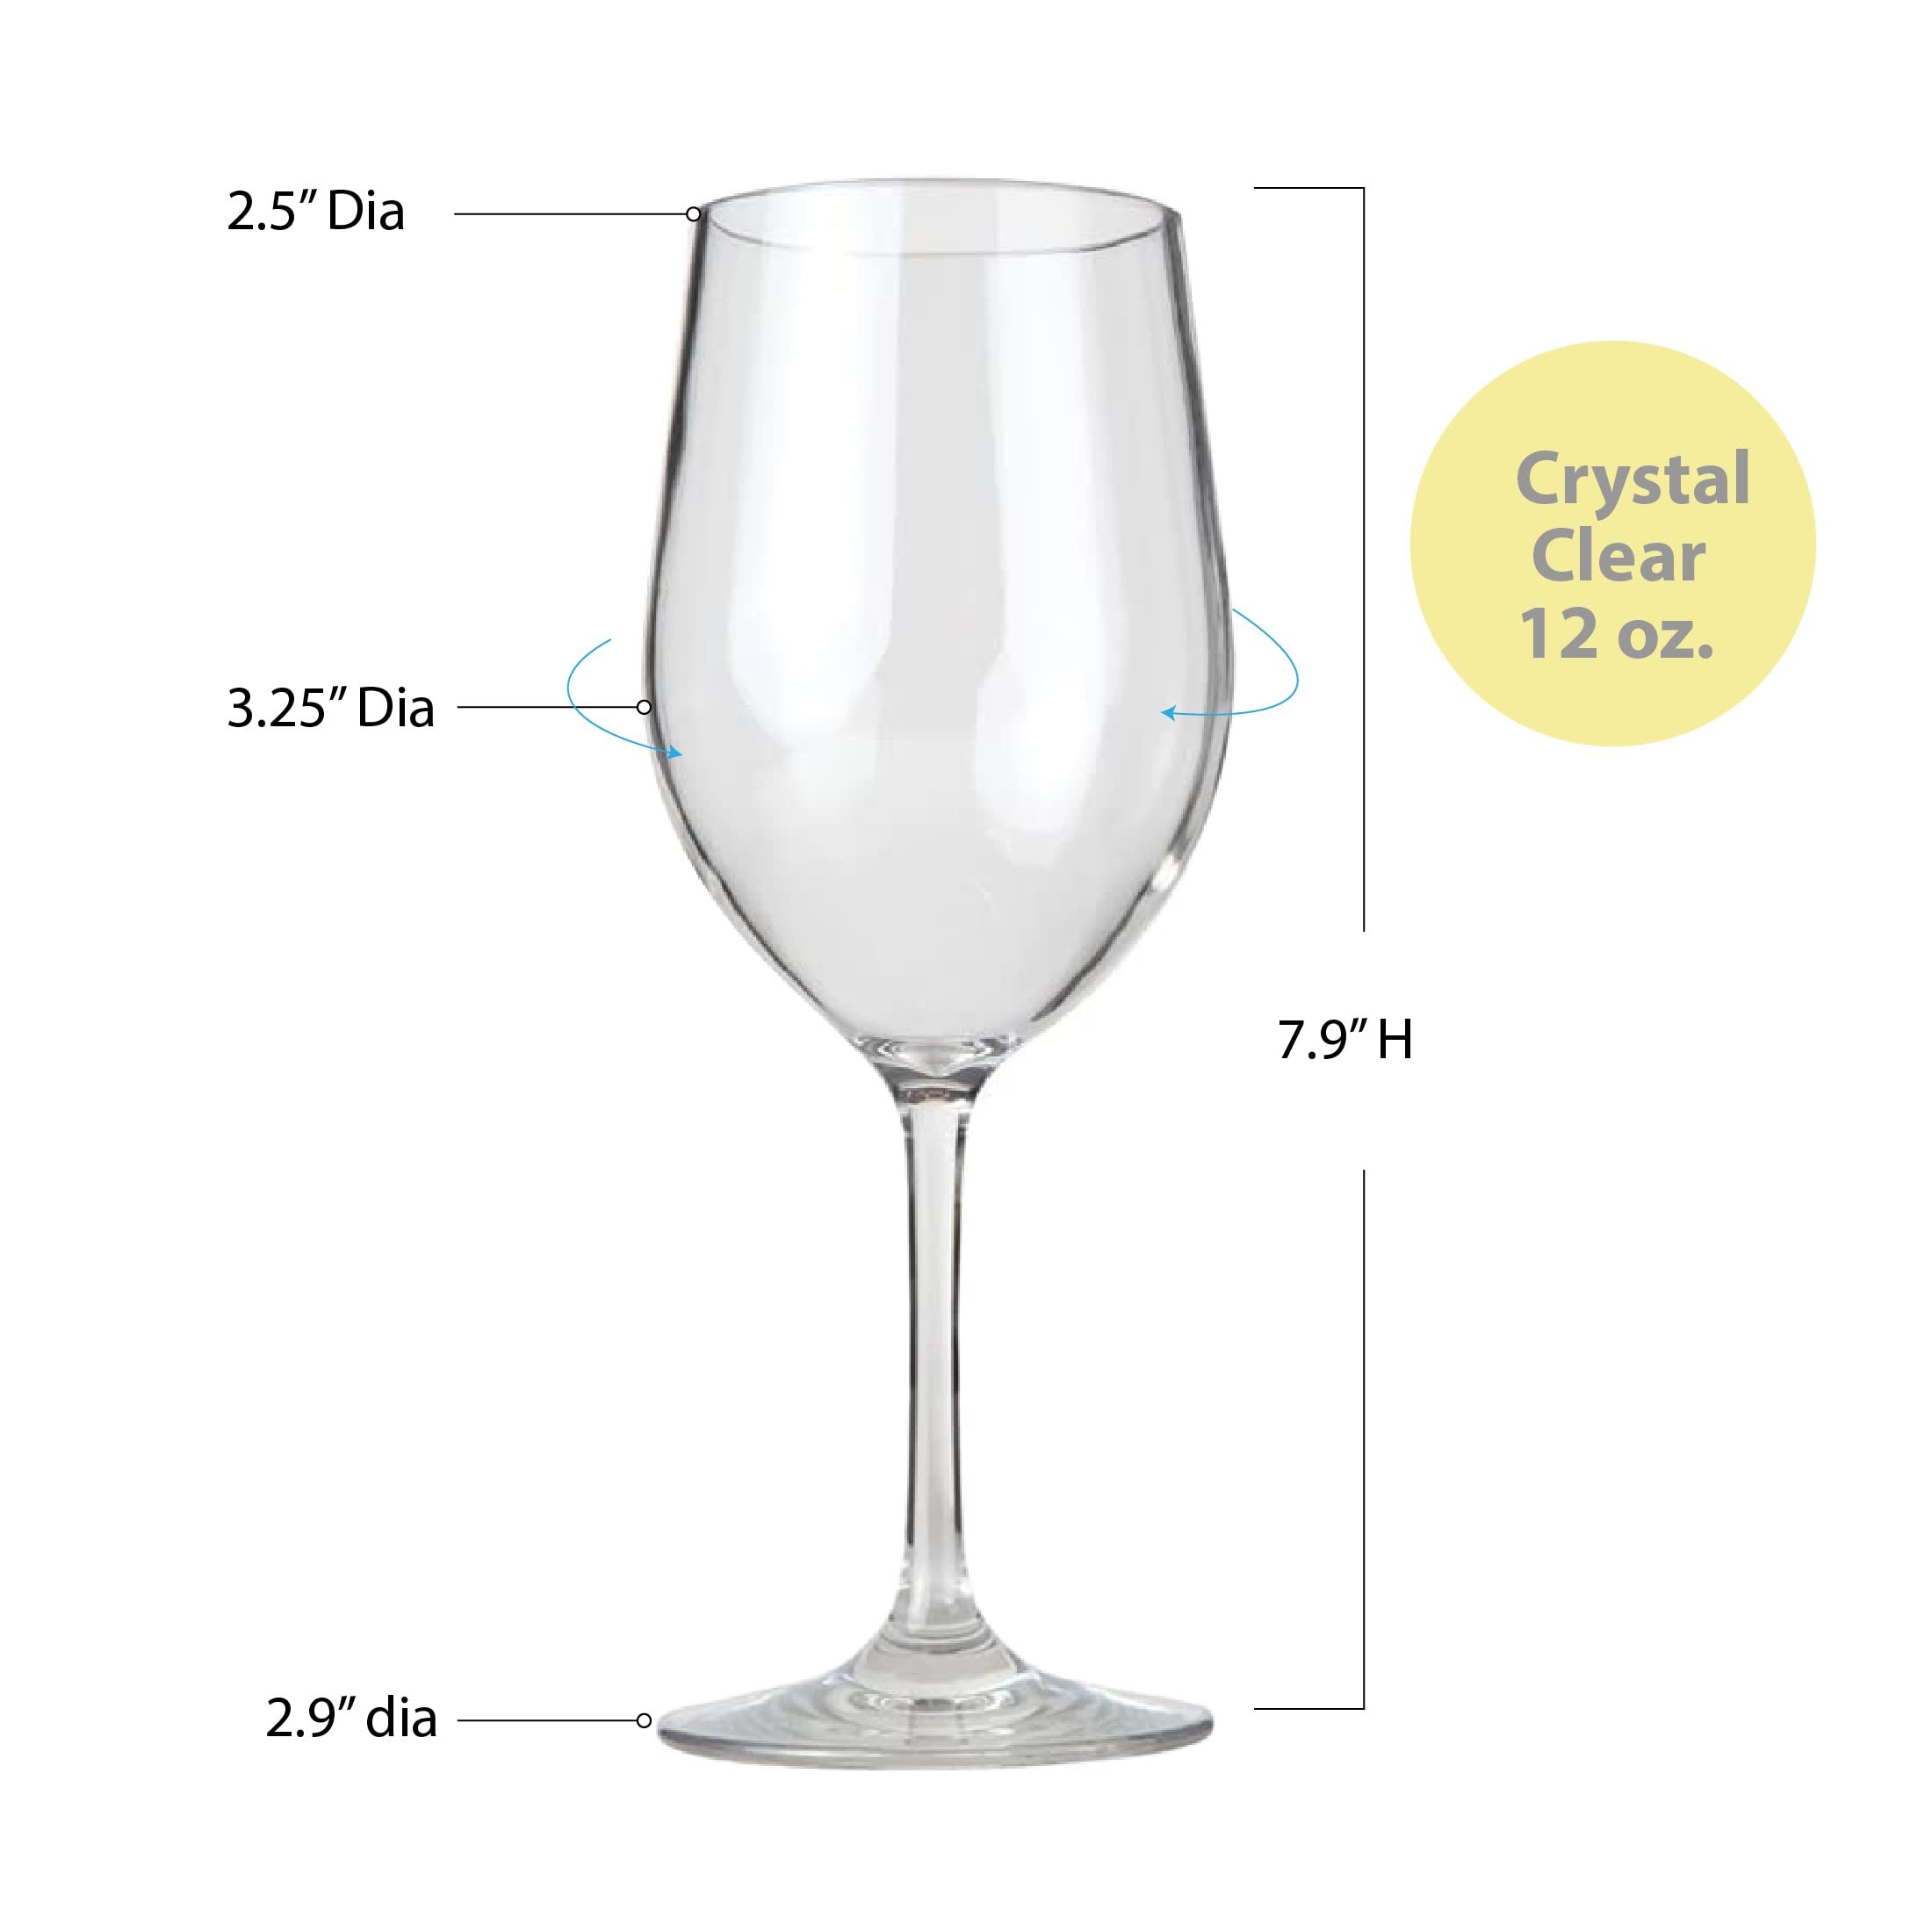 Lily's Home Unbreakable Chardonnay White Wine Glasses, Made of Shatterproof Tritan Plastic, For Indoor and Outdoor Use, Reusable and Dishwasher-Safe, Crystal Clear. 12 oz. Each, Set of 2